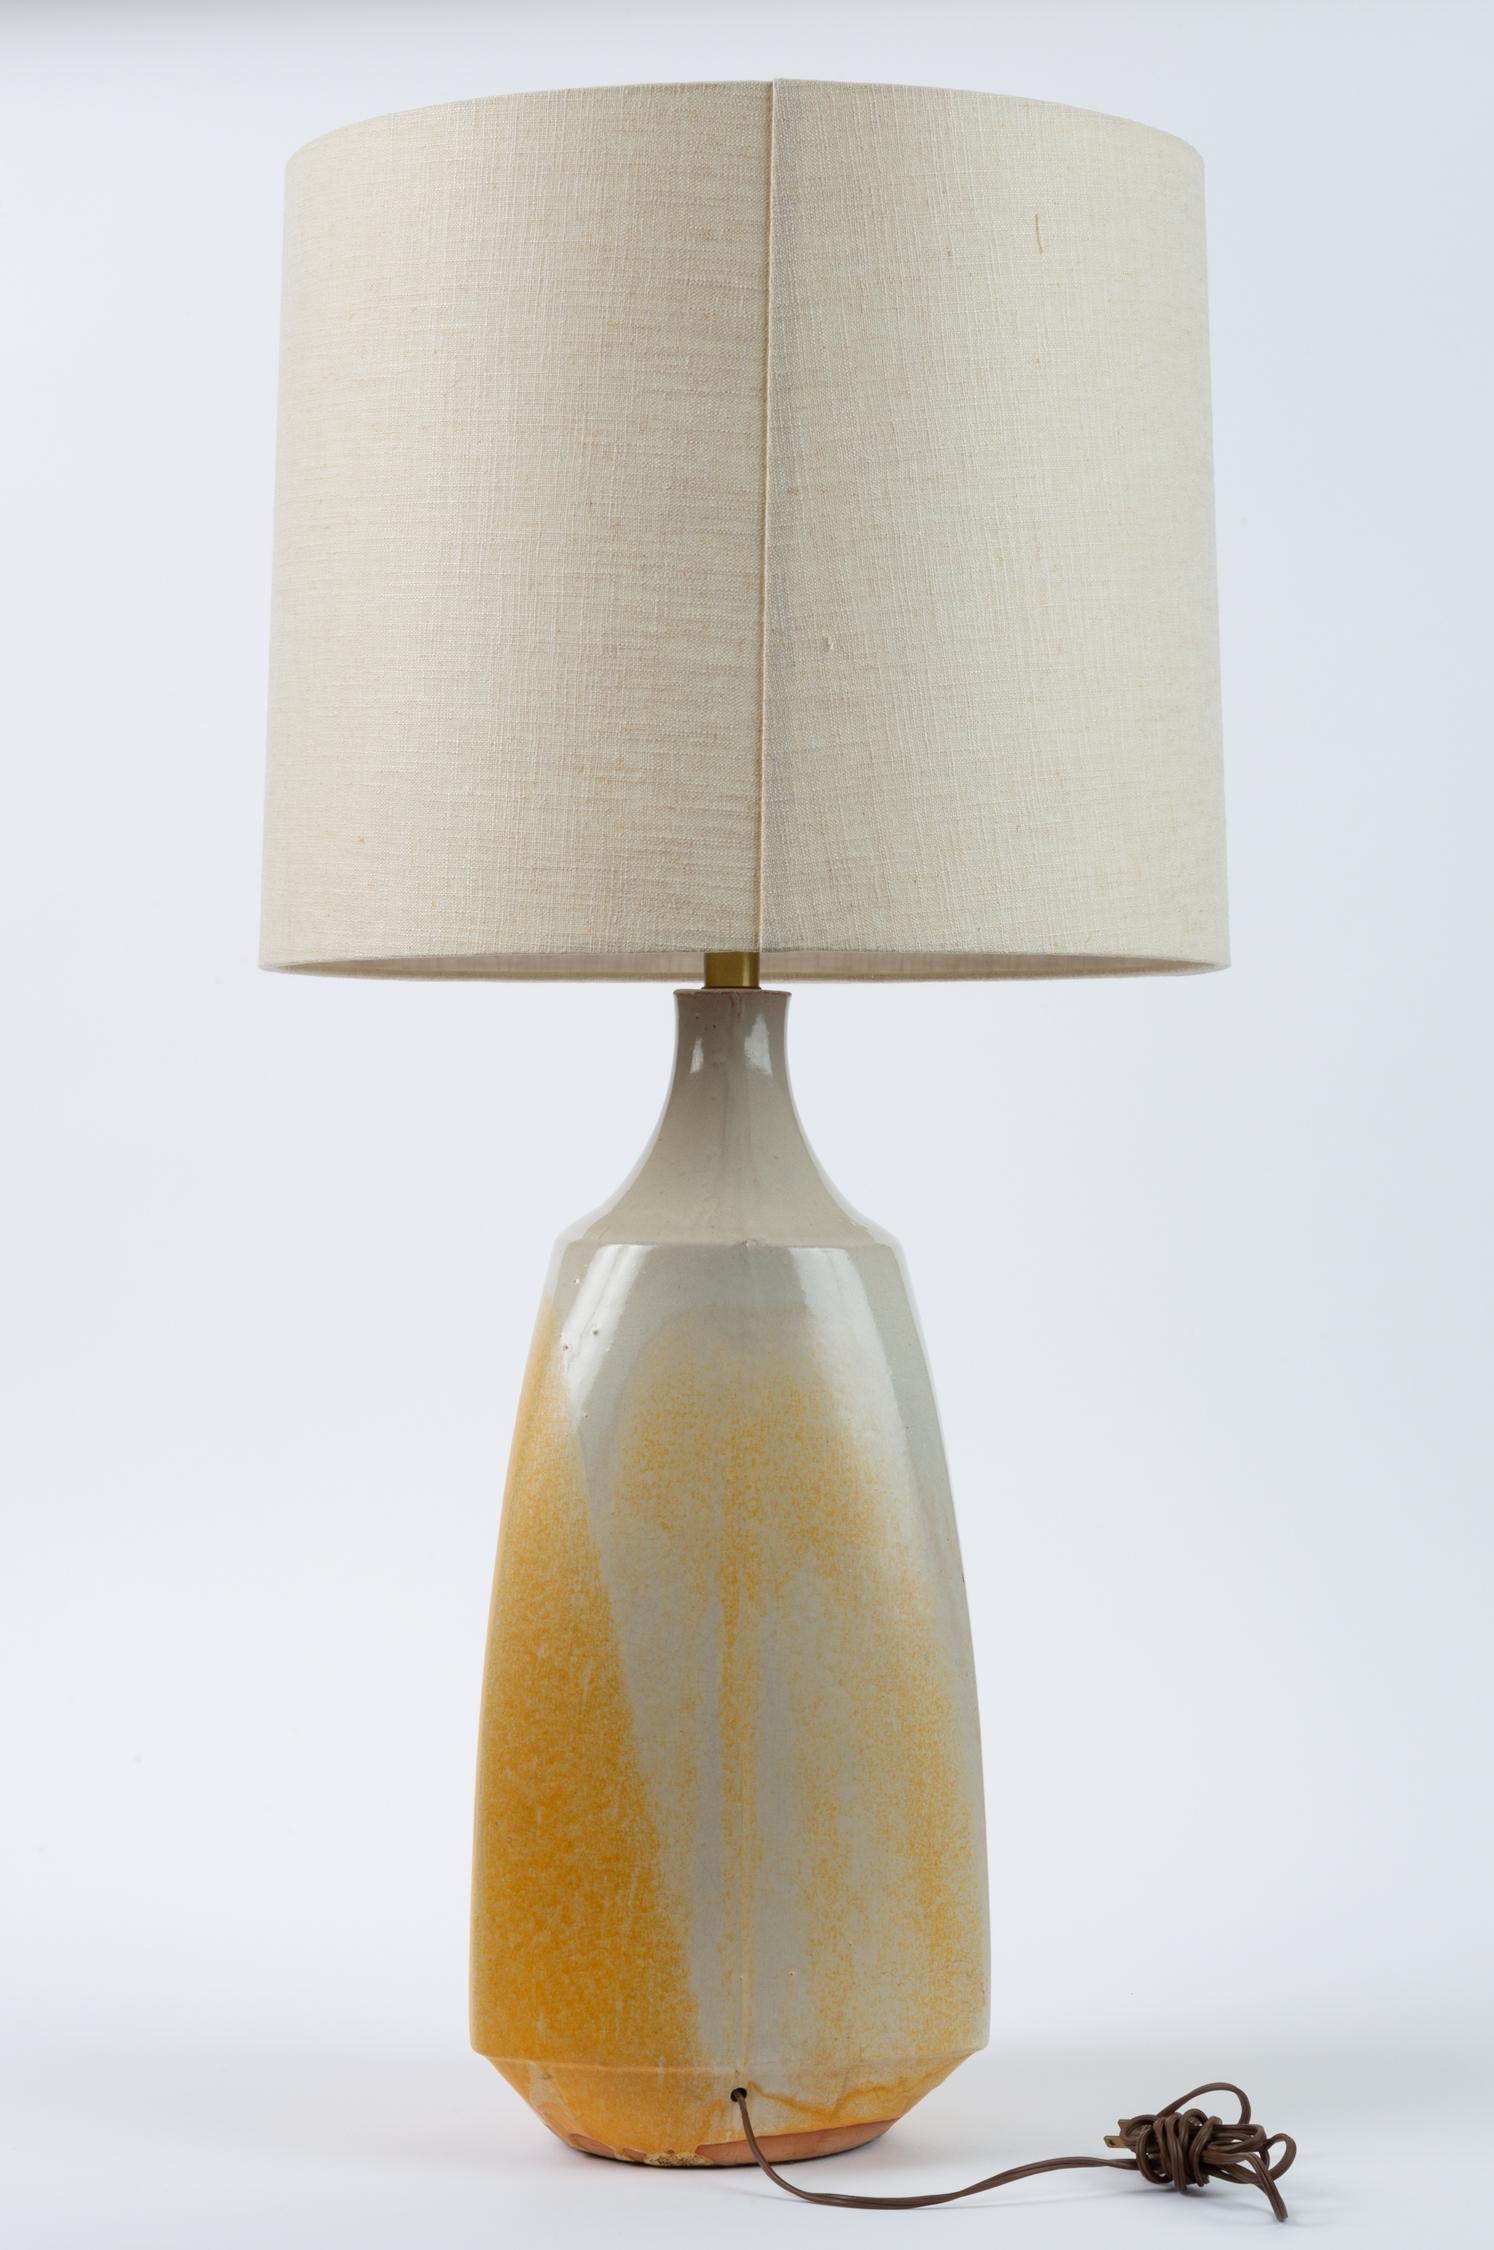 American Drip-Glaze Stoneware Lamp by David Cressey for Architectural Pottery